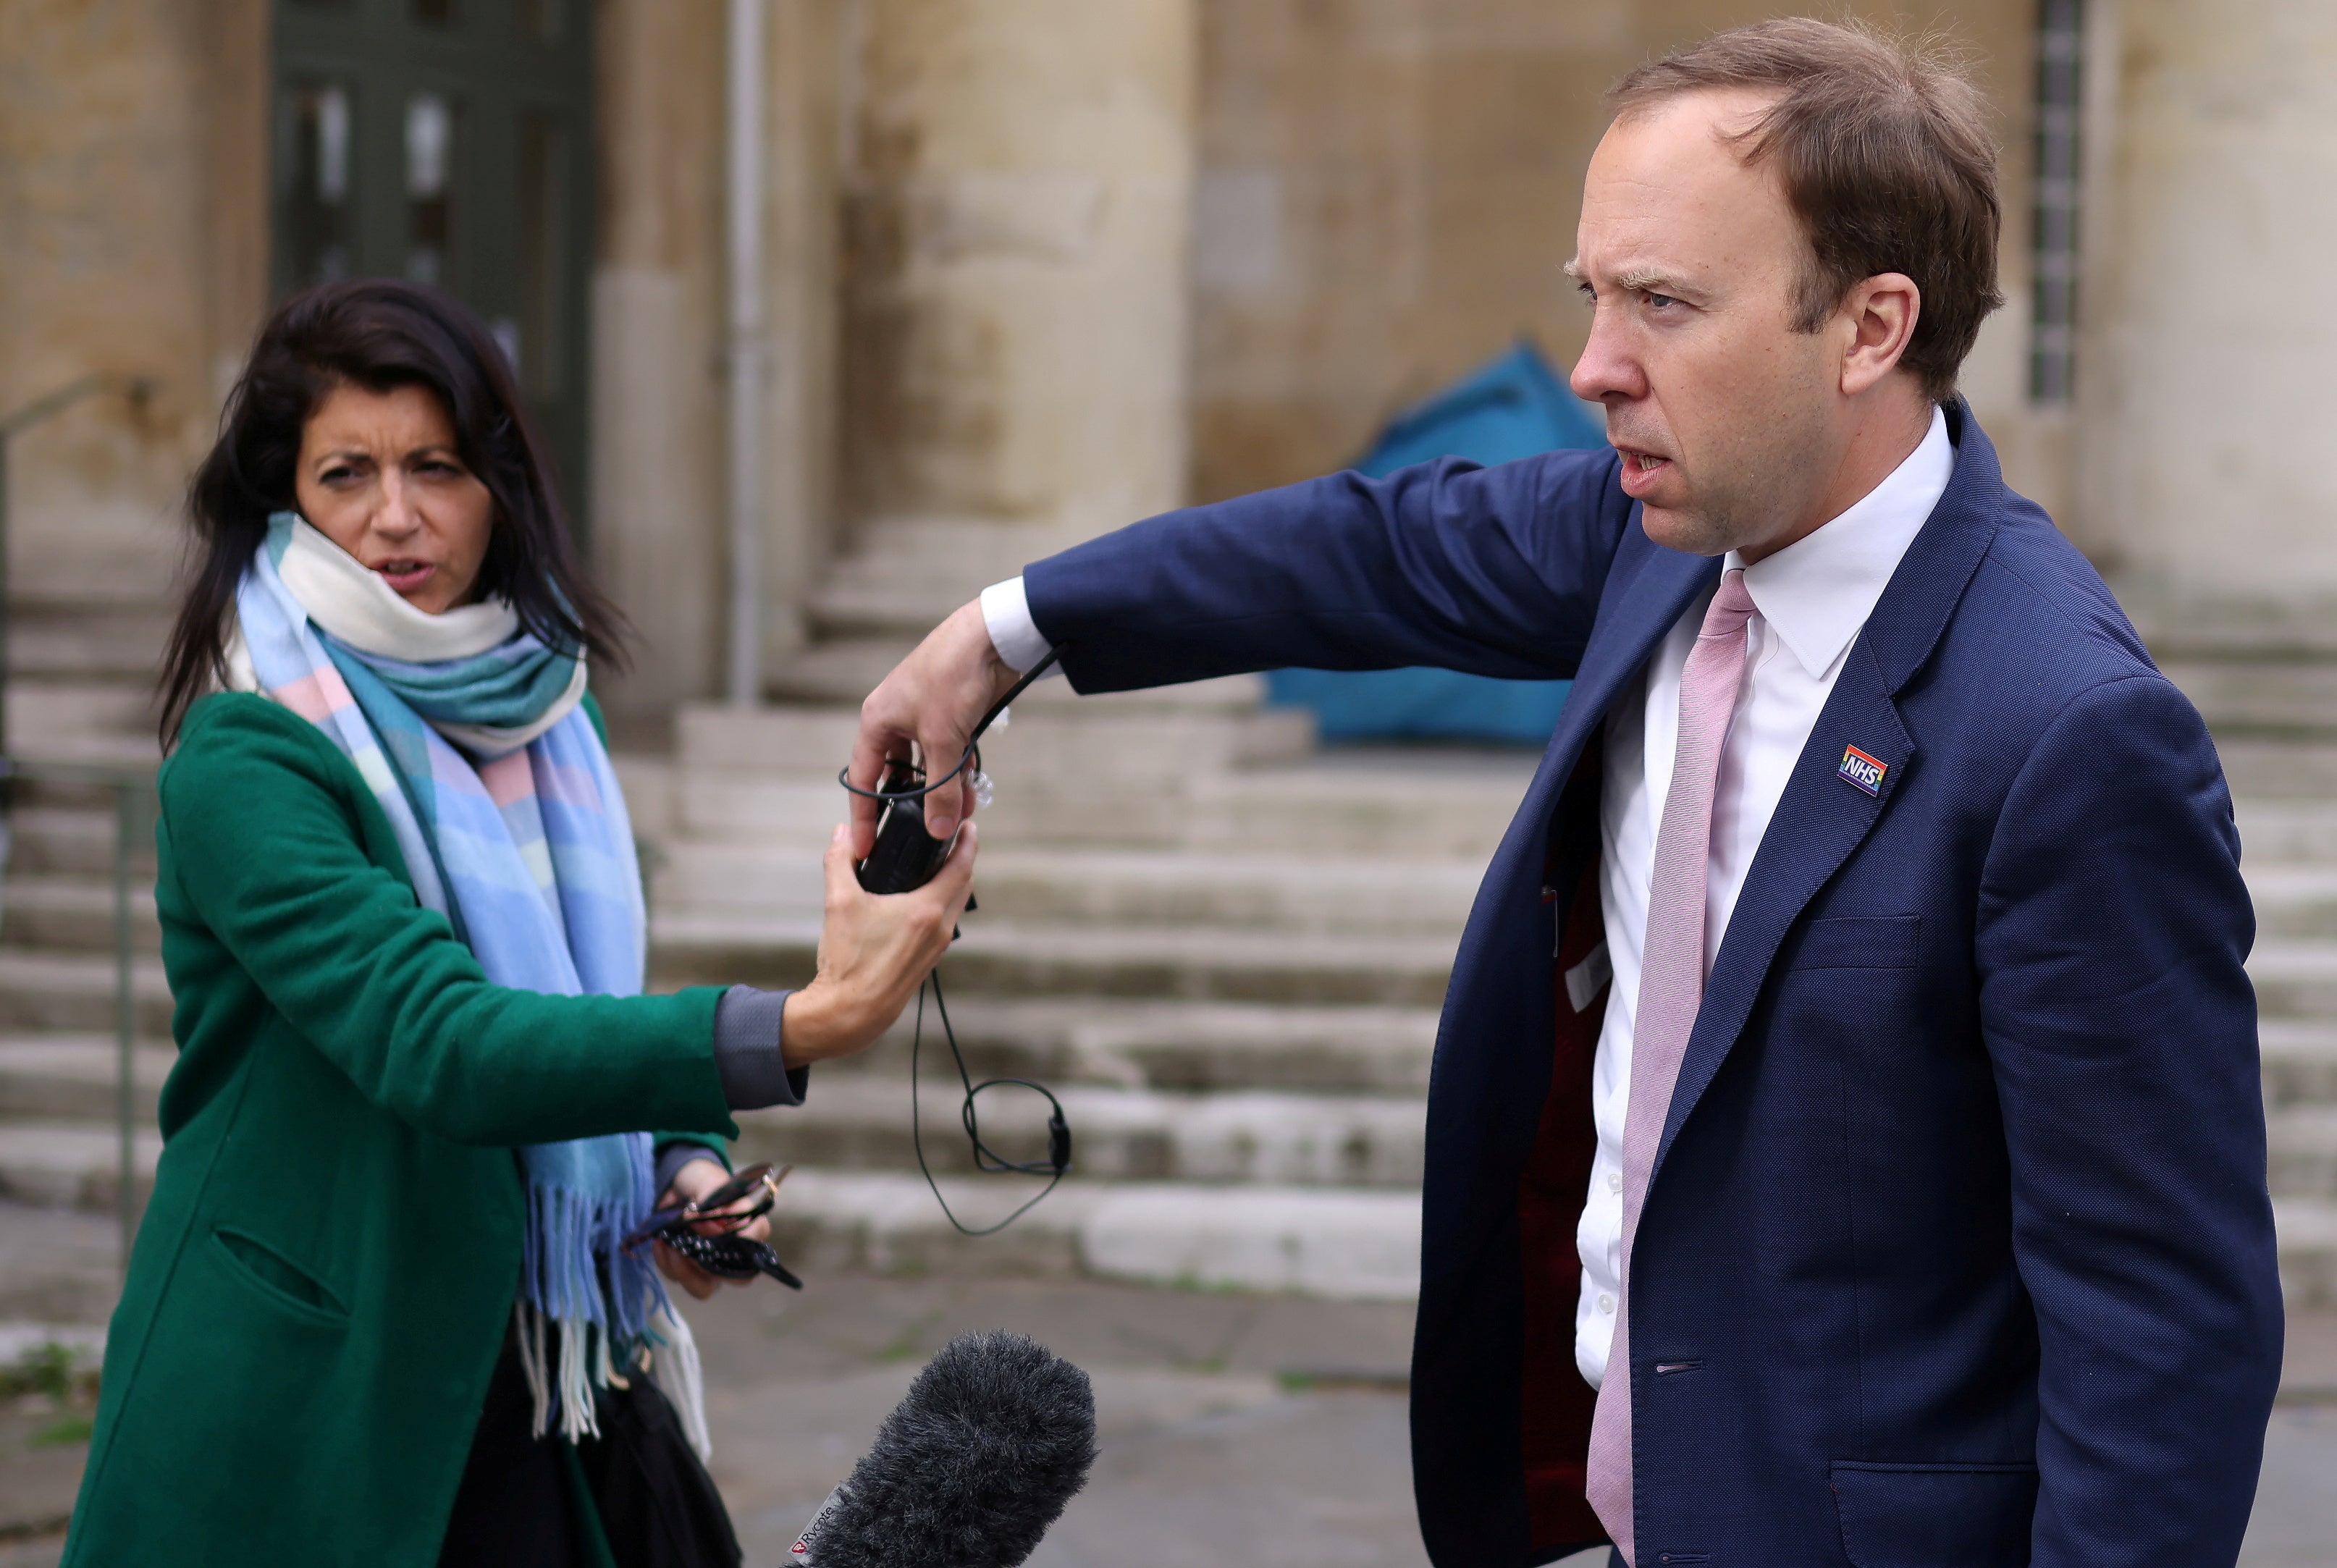 Matt Hancock hands a microphone to his aide Gina Coladangelo outside Broadcasting House in May